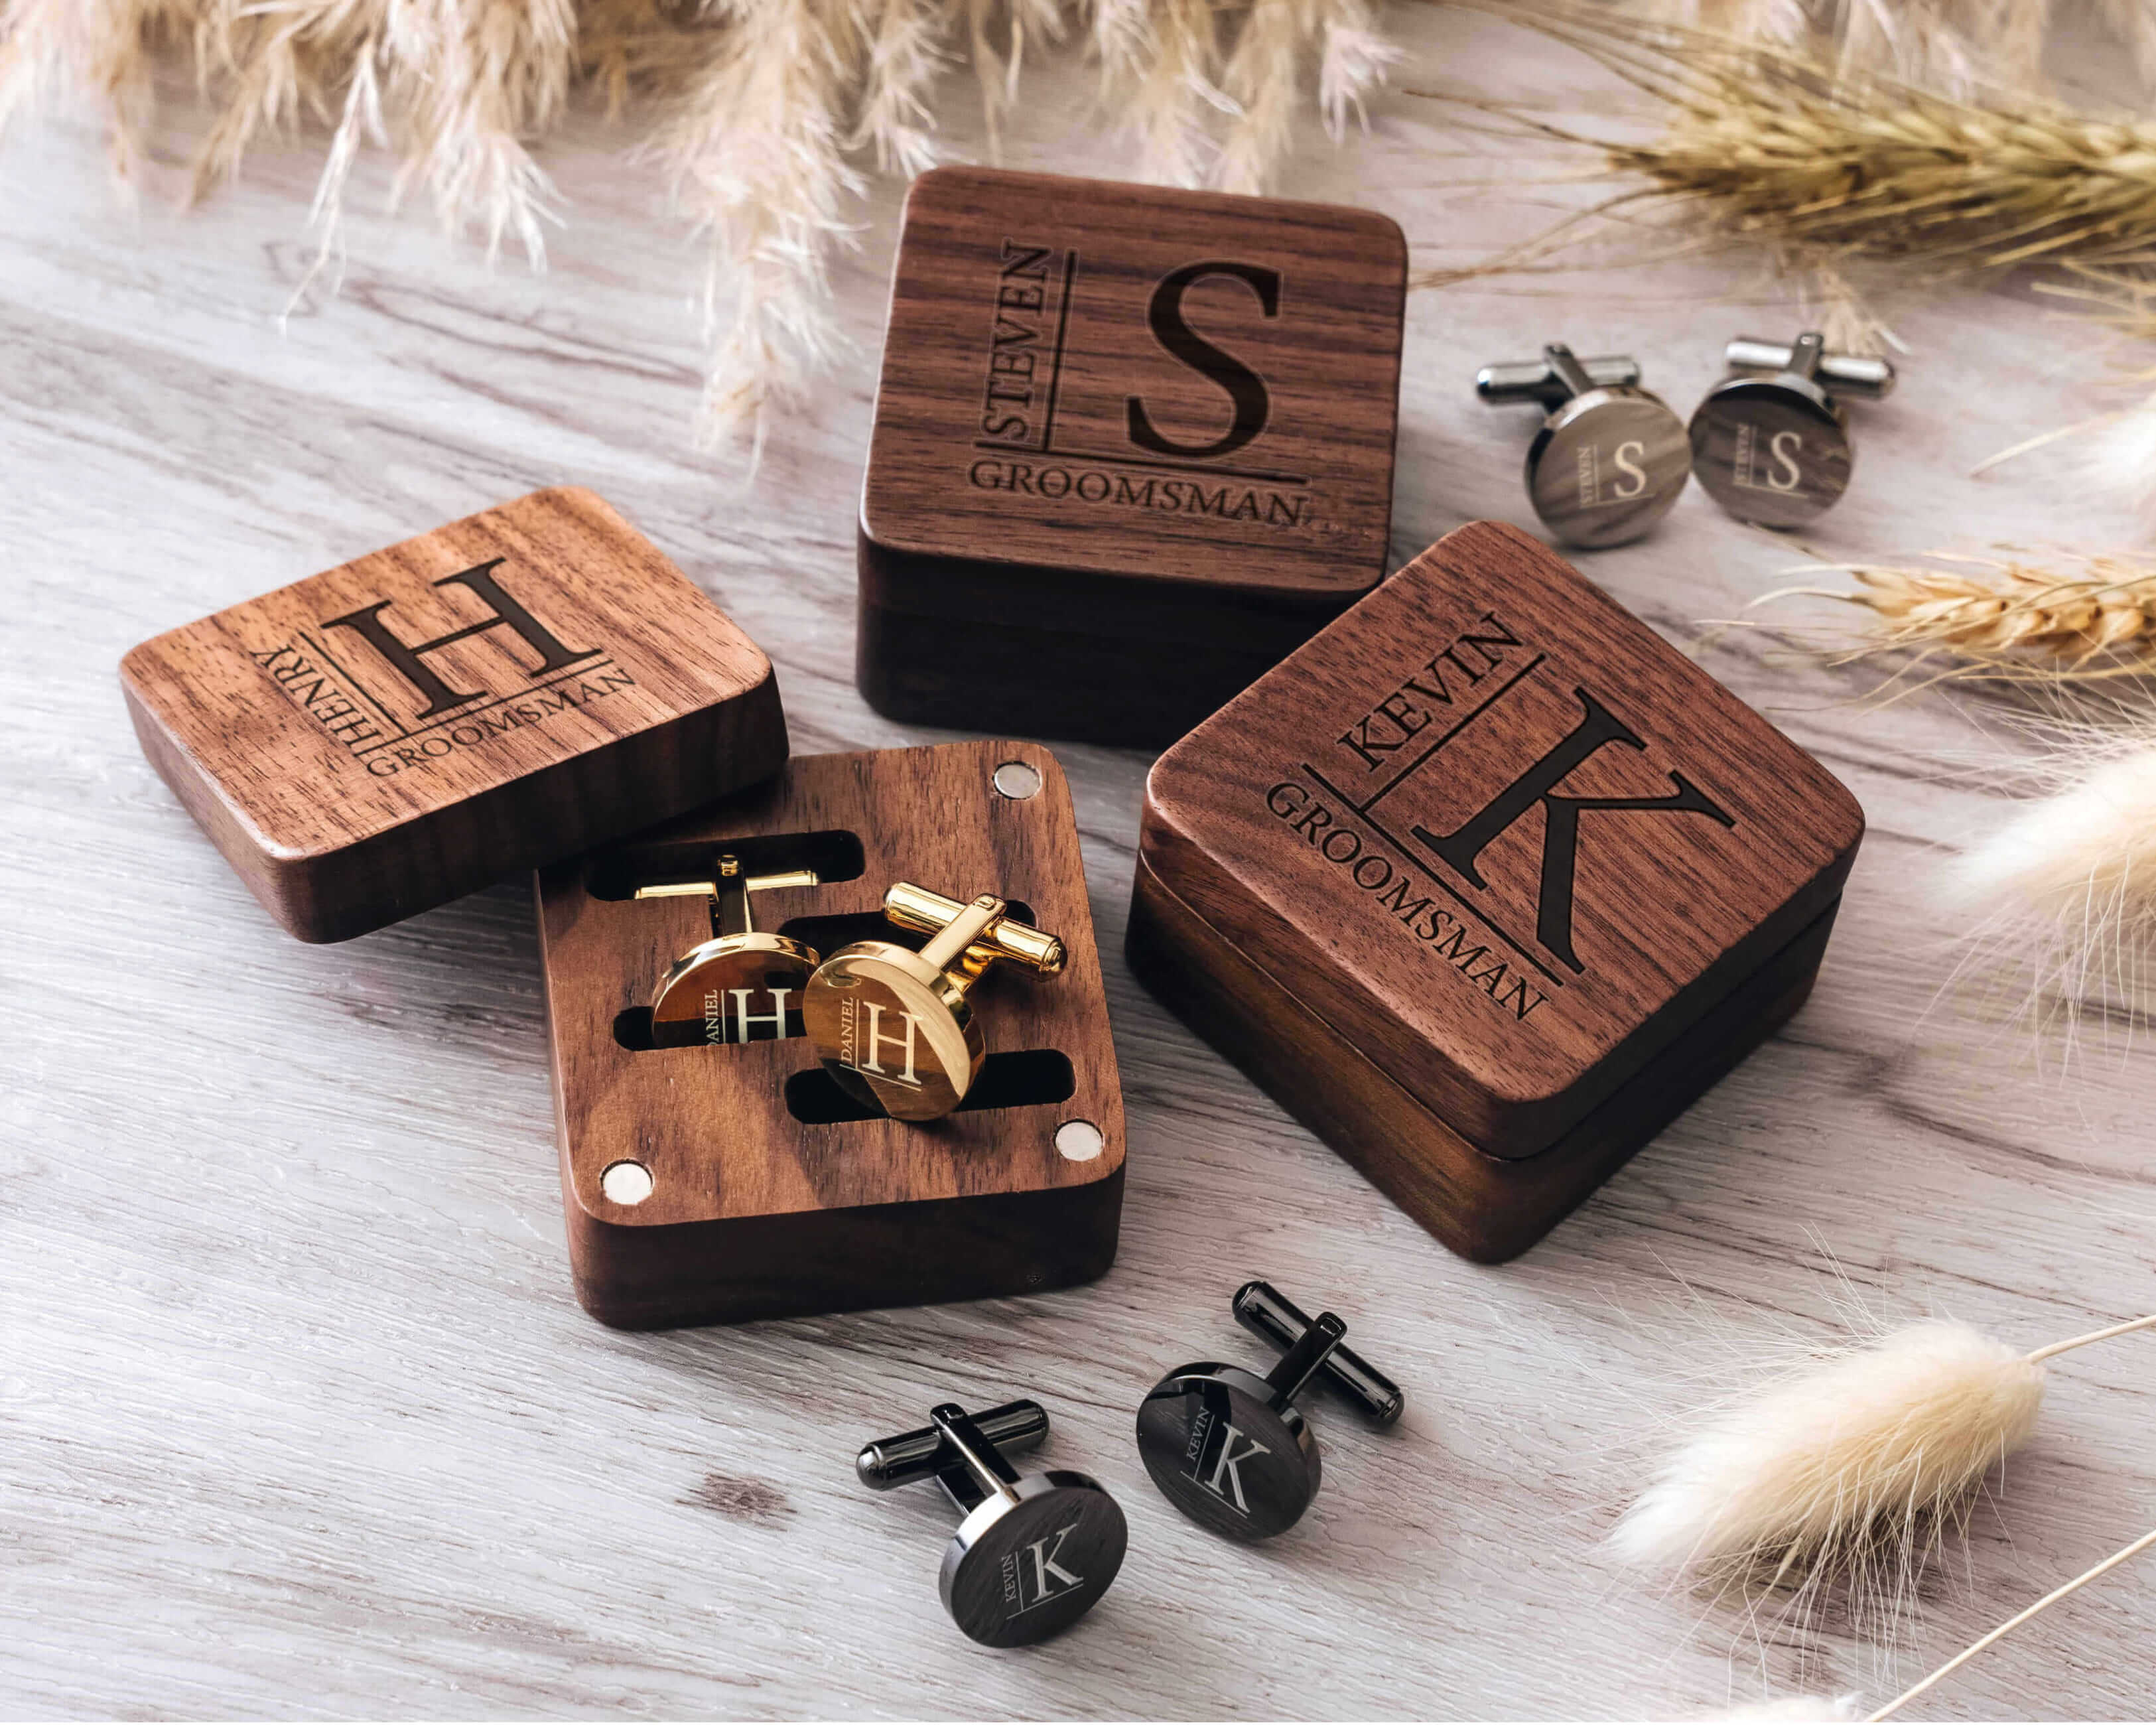 Engraved Cufflinks - 3 Different Type of Engraved Metal Wedding Cufflinks with custom initials, name and text, perfect gift for your groomsmen, father or husband.